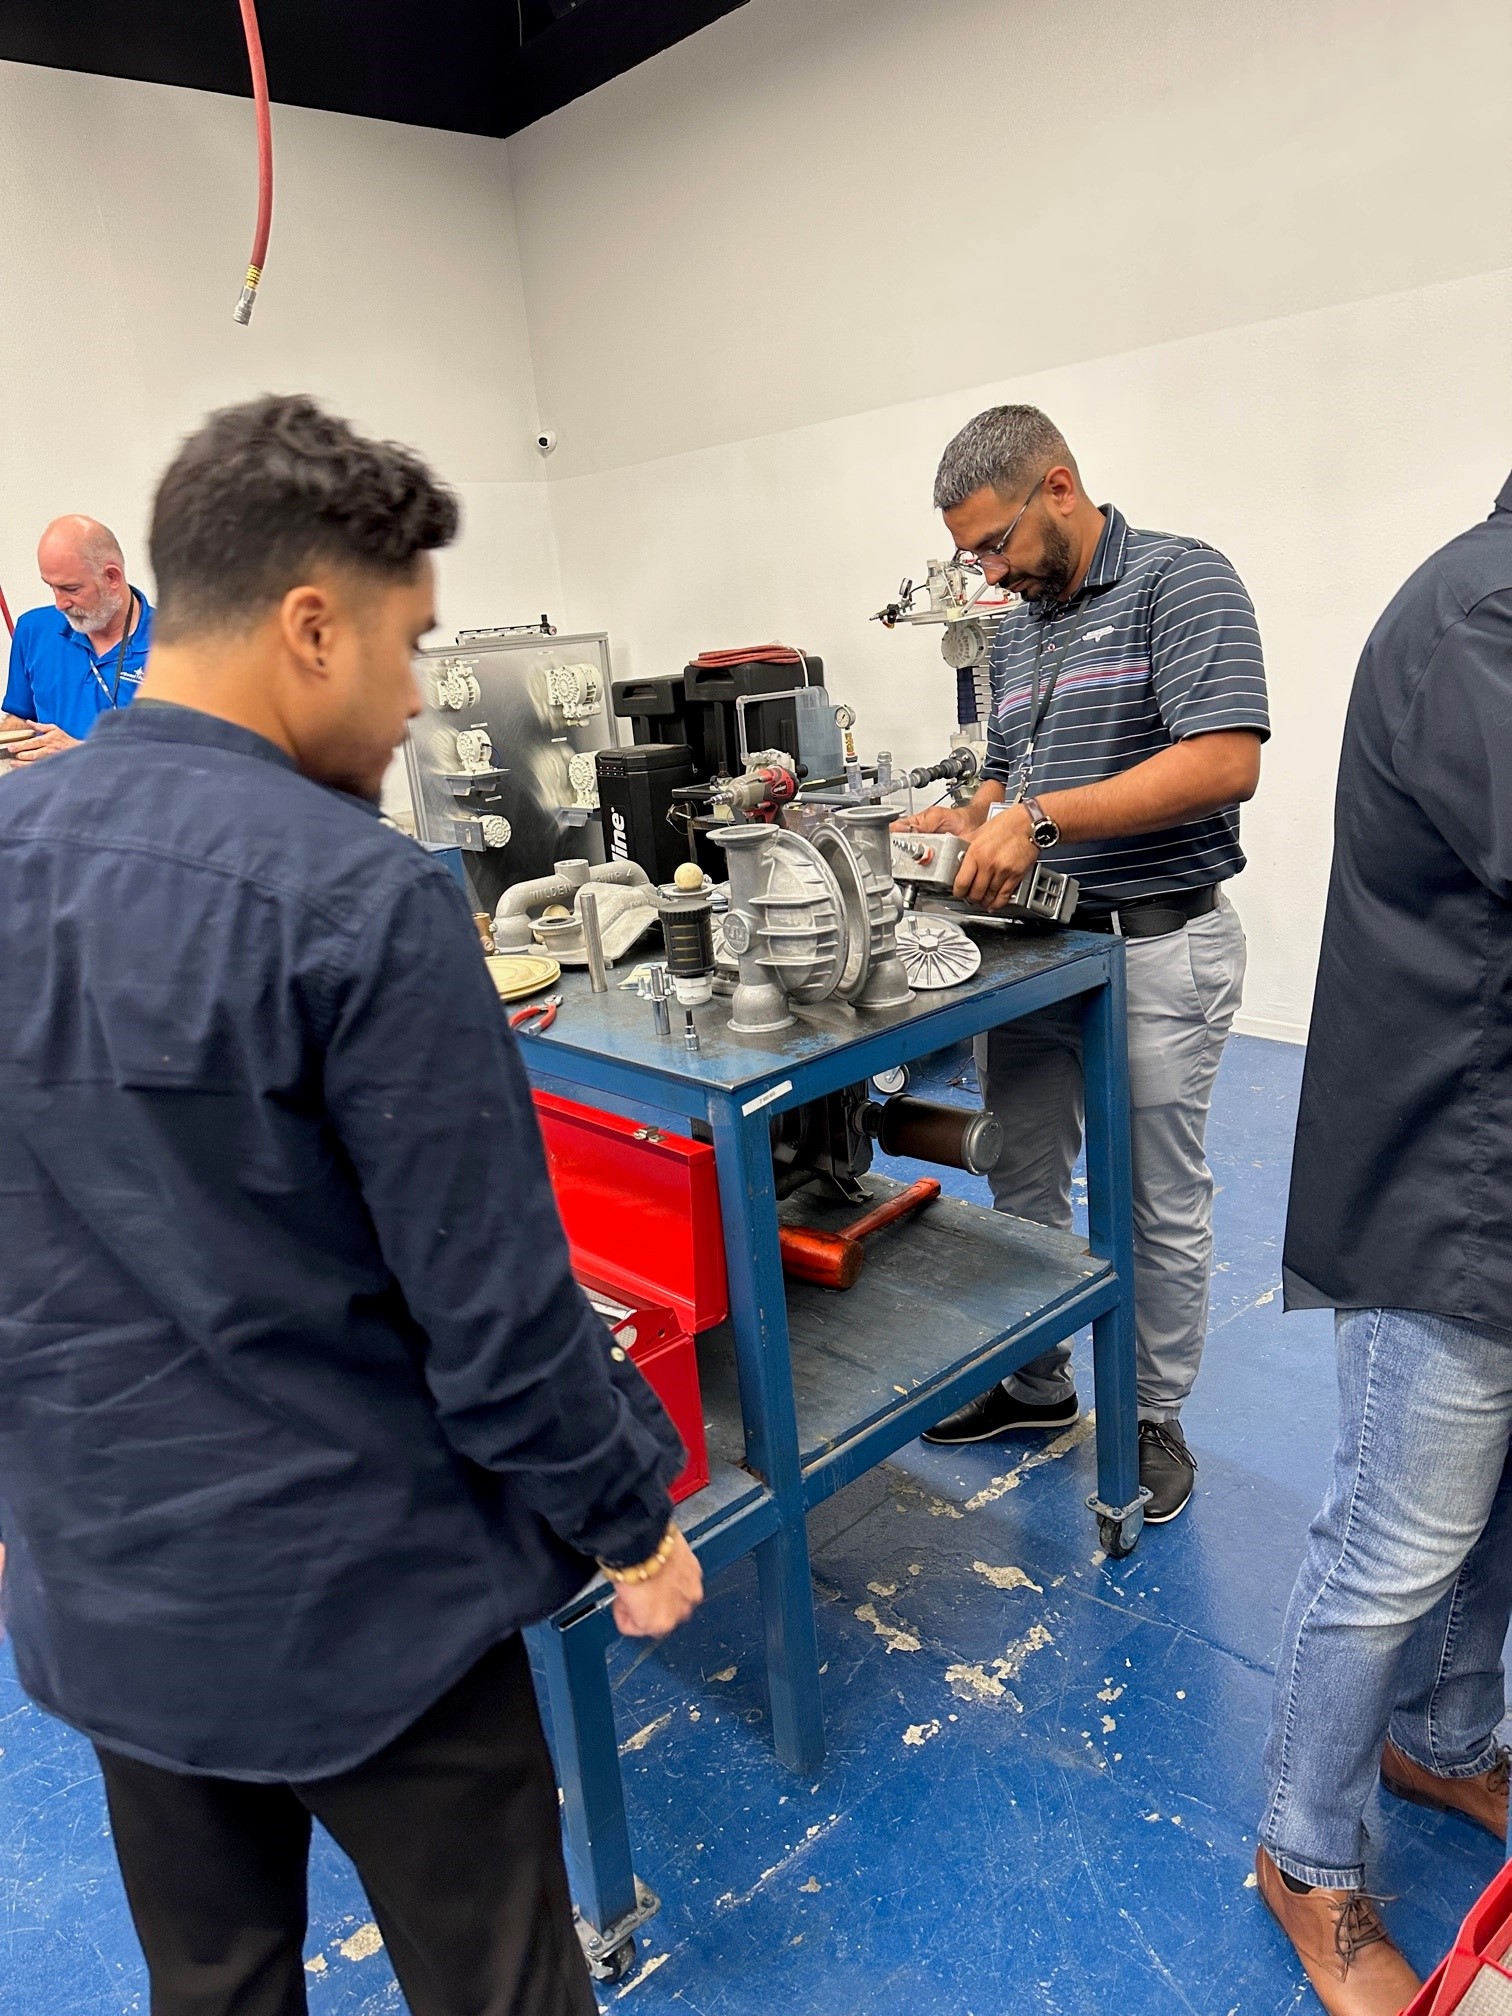 Technicians receiving hands-on training on how to repair fuel pumps